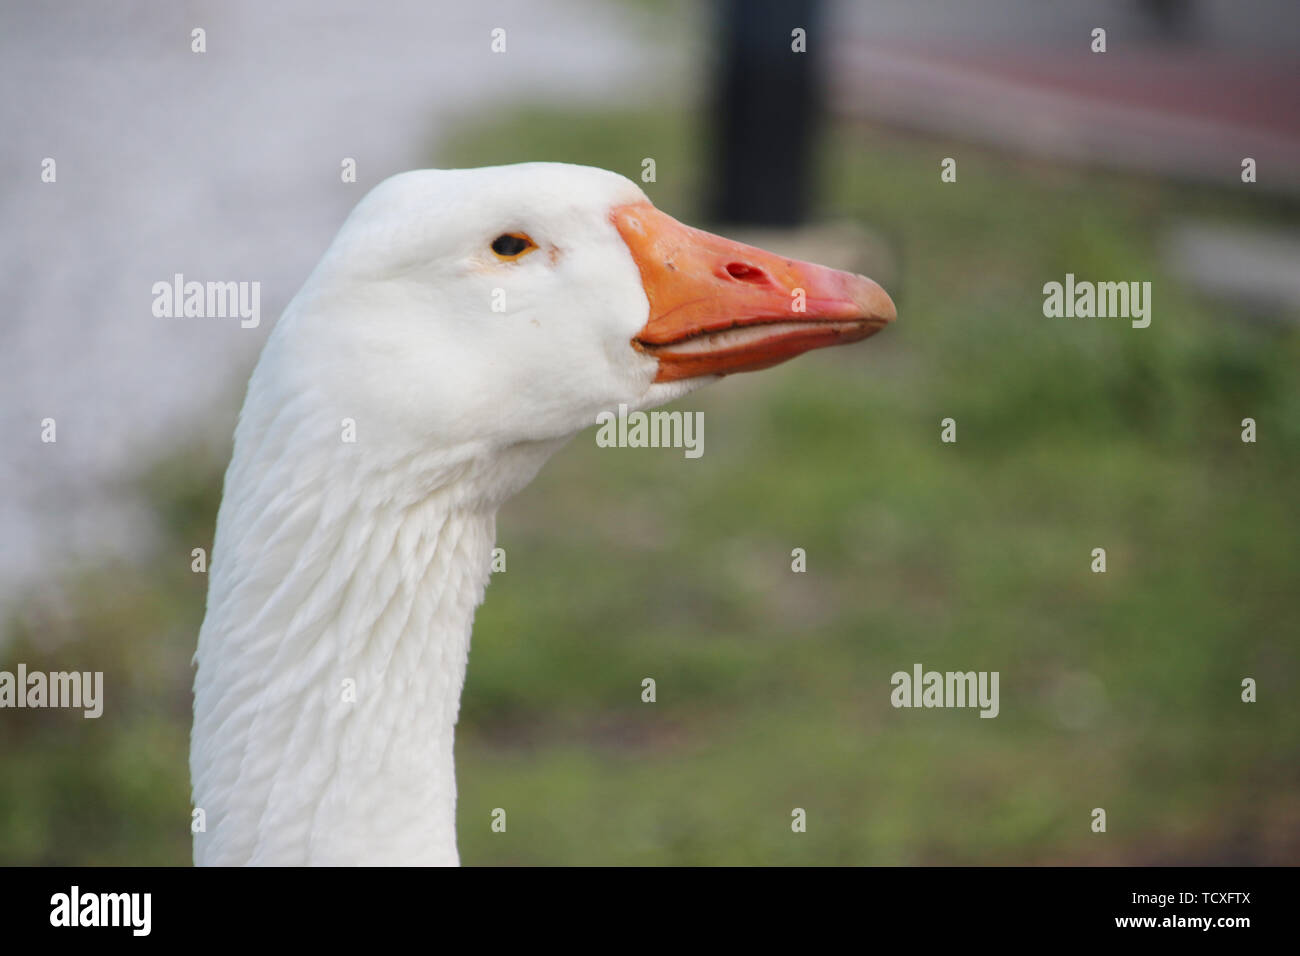 head of a wild white goose on the streets Stock Photo